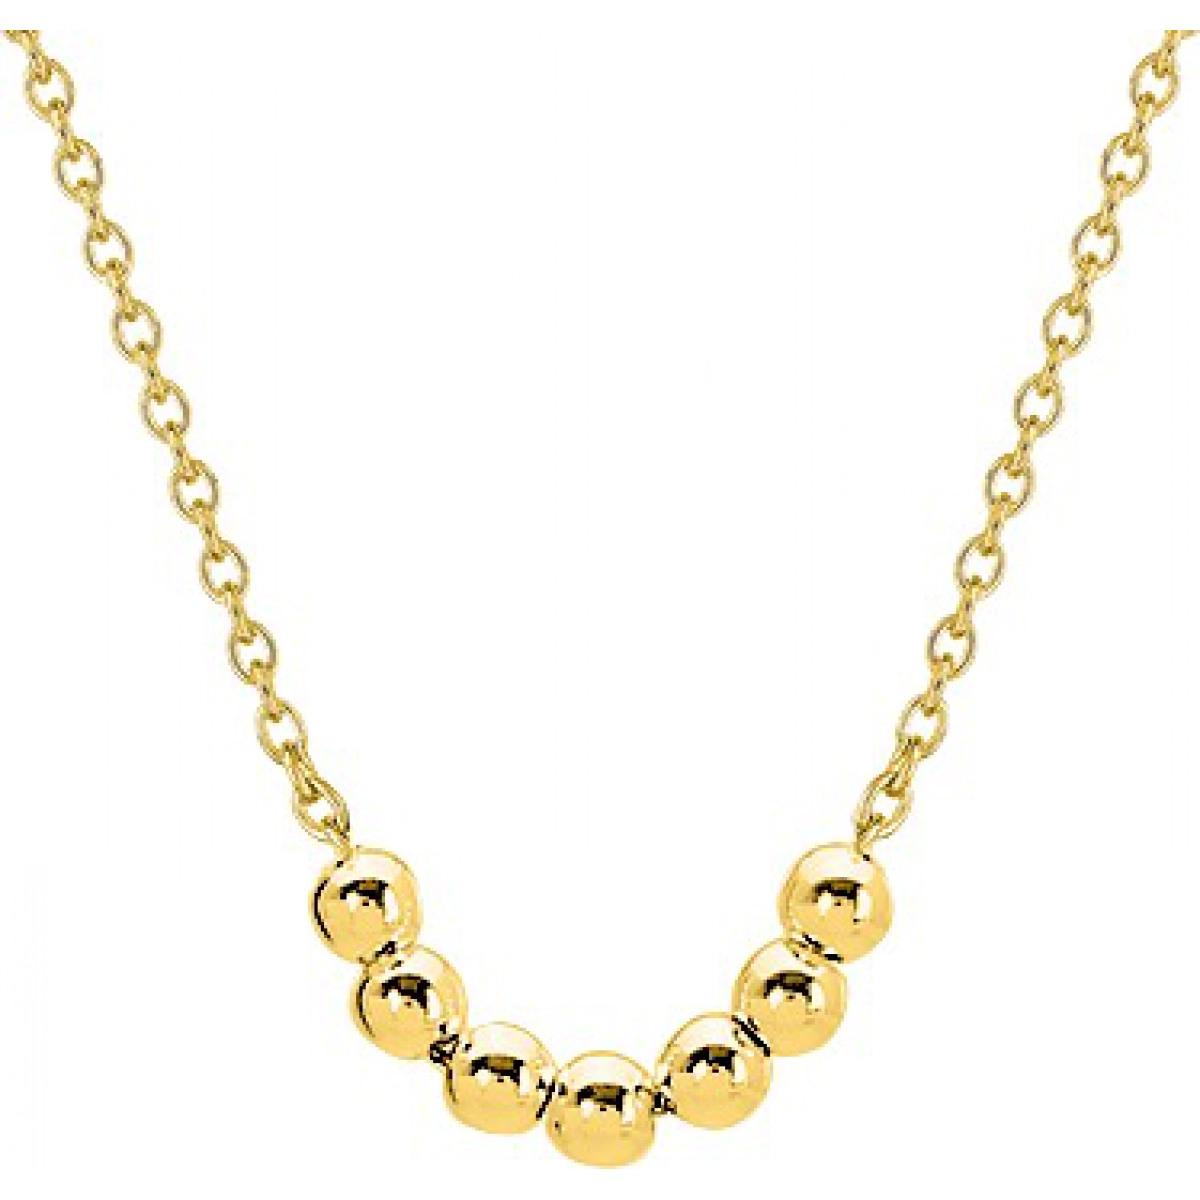 Collier plaqué or - Taille: 42  Lua Blanca  132093.42